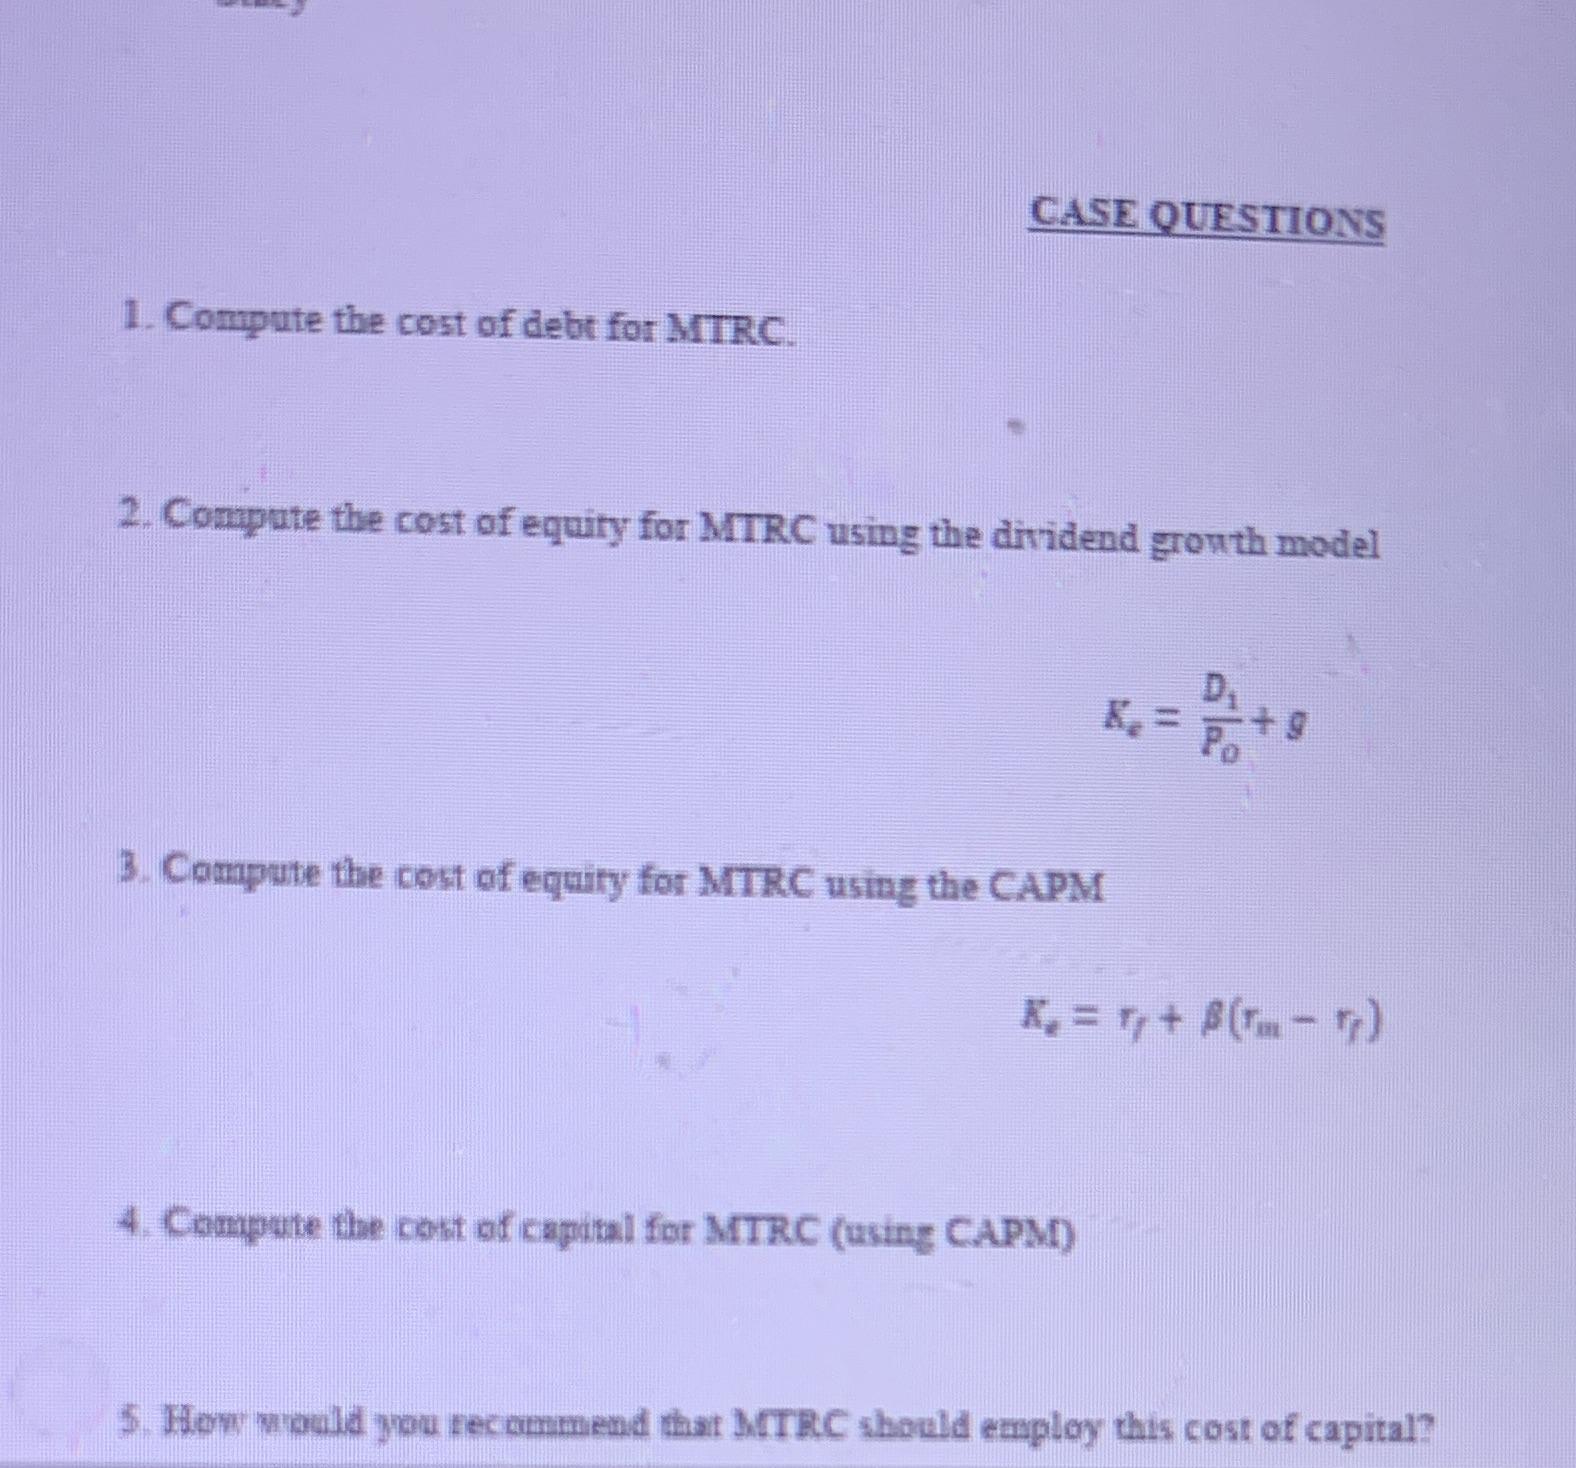 1. Compute the cost of debt for MTRC. CASE QUESTIONS 2. Compute the cost of equity for MTRC using the